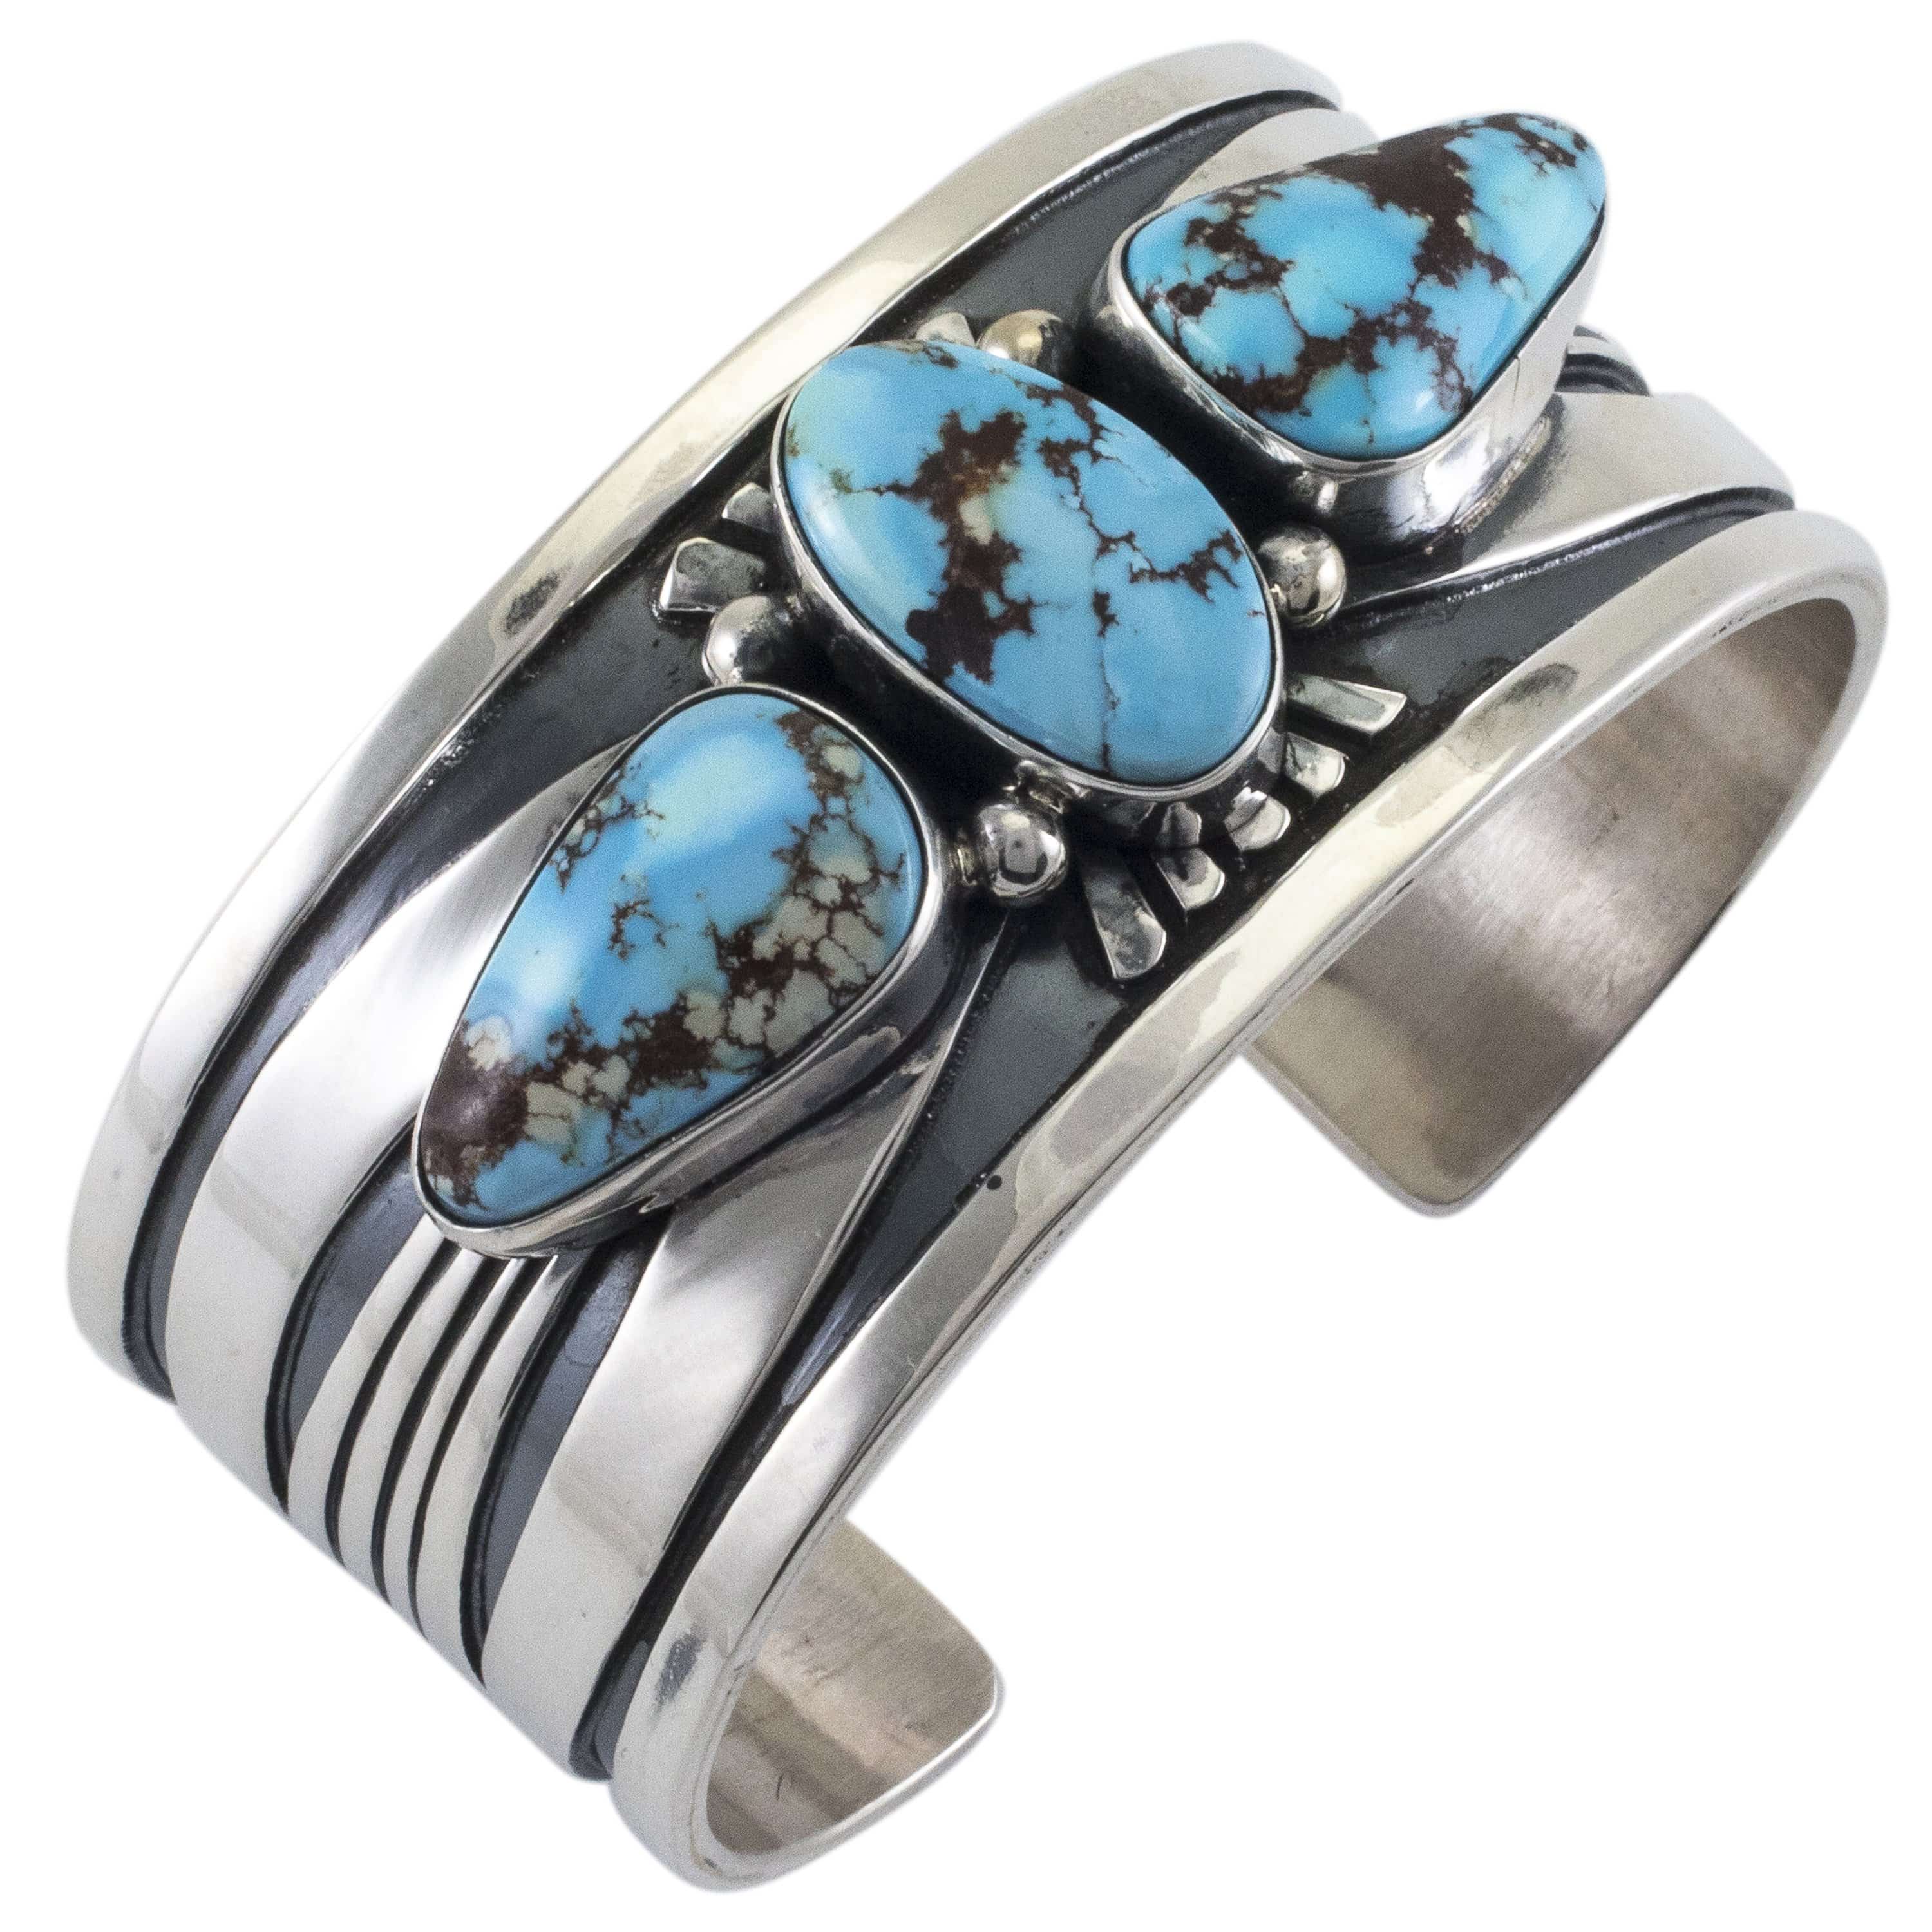 Kalifano Native American Jewelry Golden Hills Turquoise USA Native American Made 925 Sterling Silver Cuff NAB4500.006